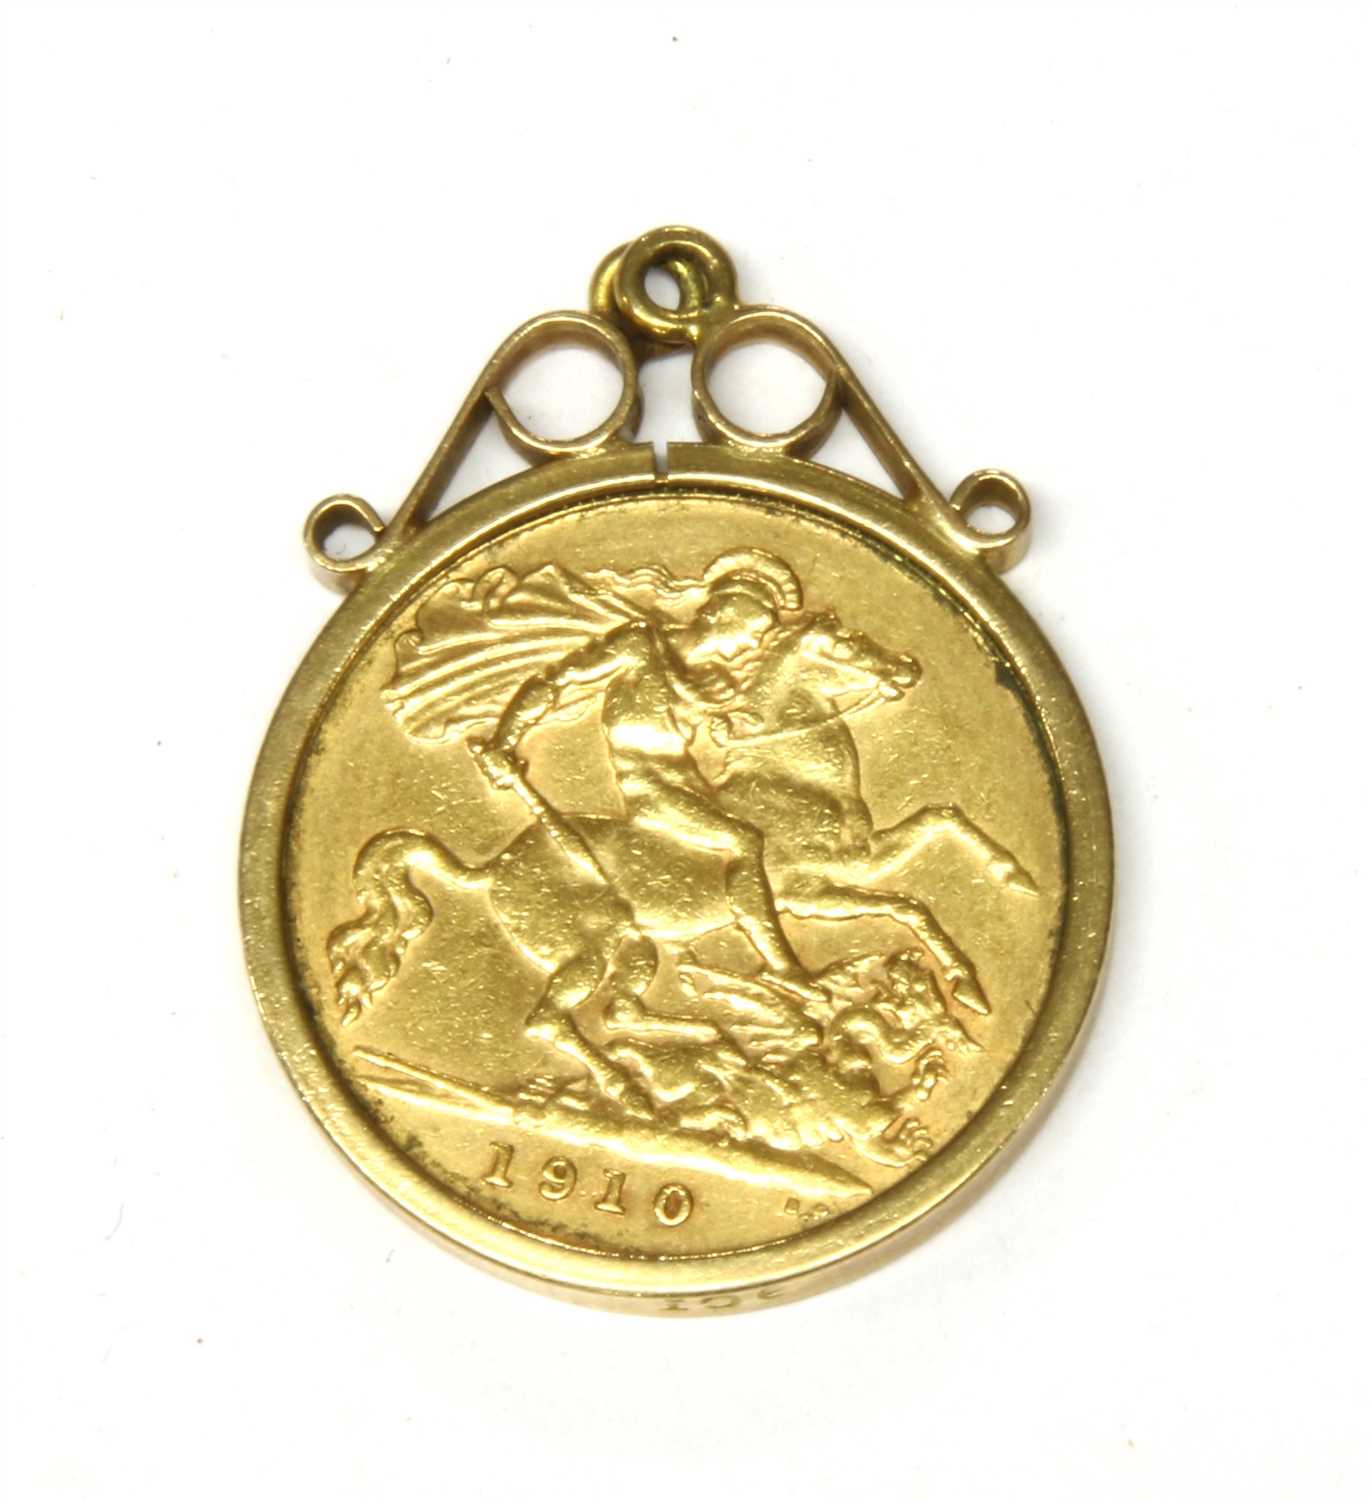 Lot 5 - A half sovereign gold pendant coin dated 1910